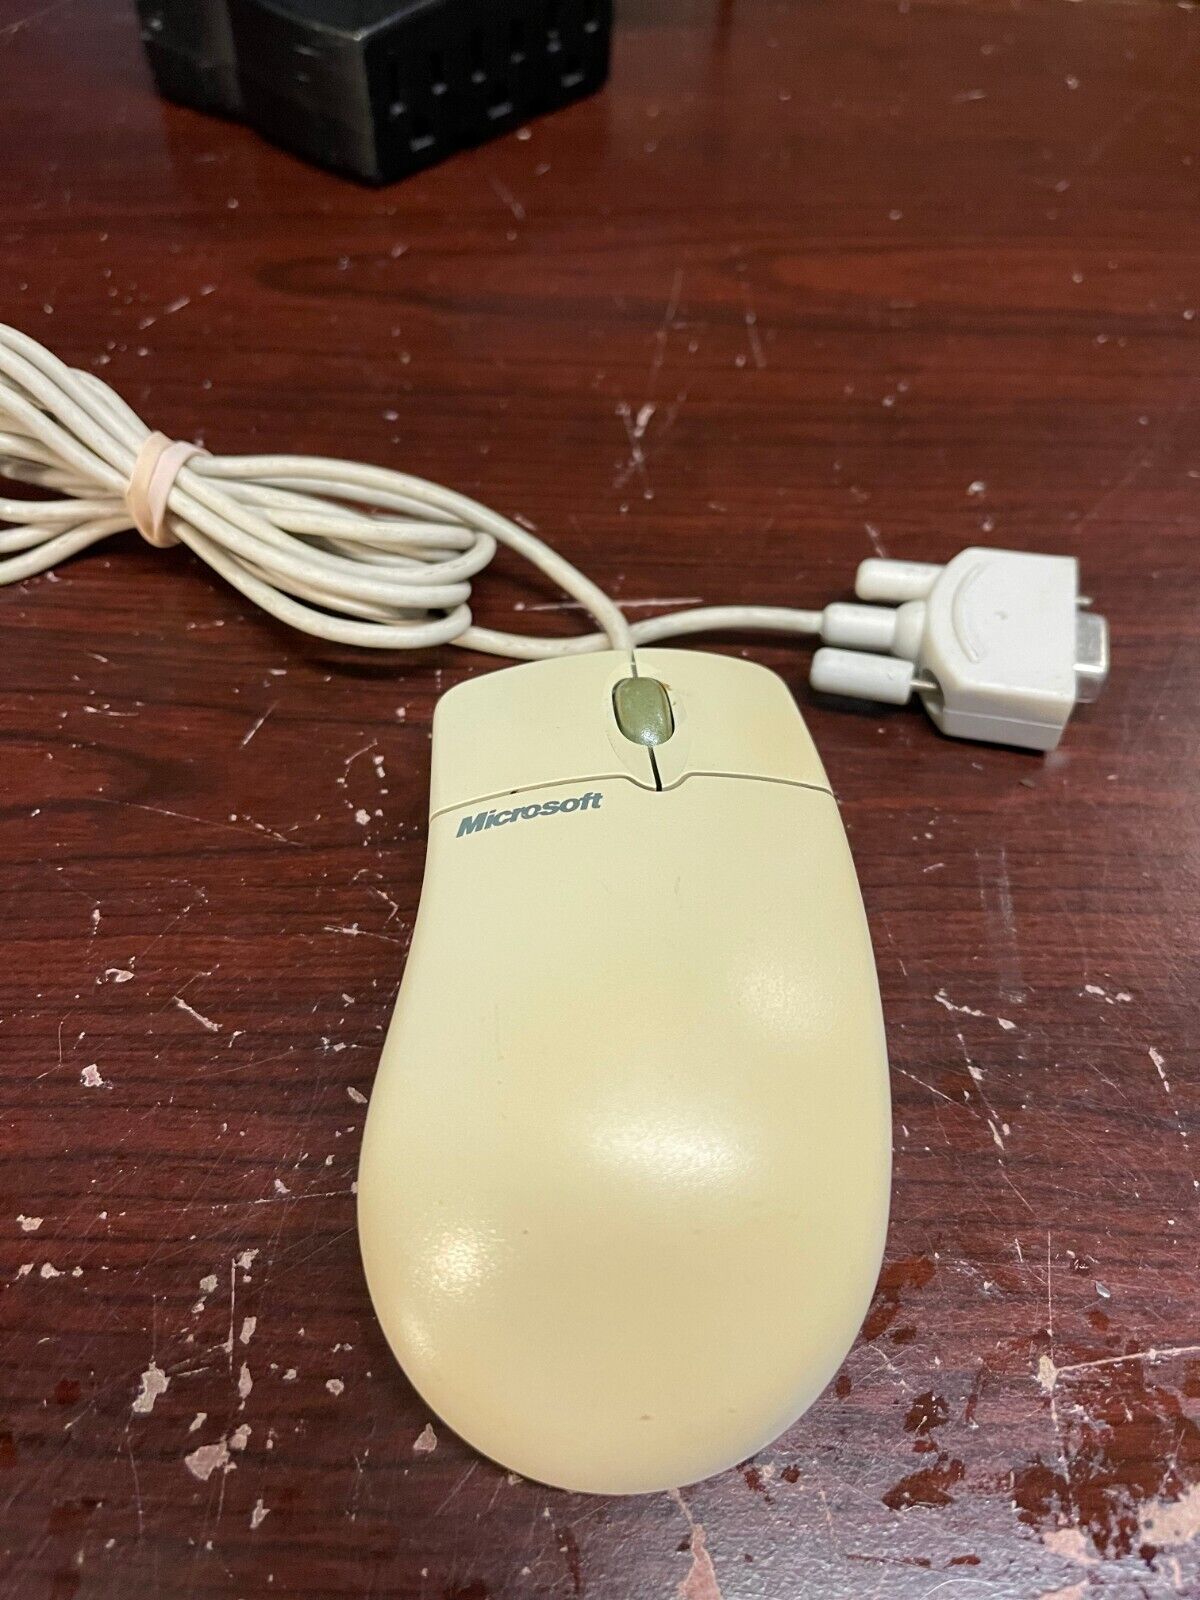 Microsoft Intellimouse 1.1A -  3 Button (2 Button + Scroll) Serial 9-Pin